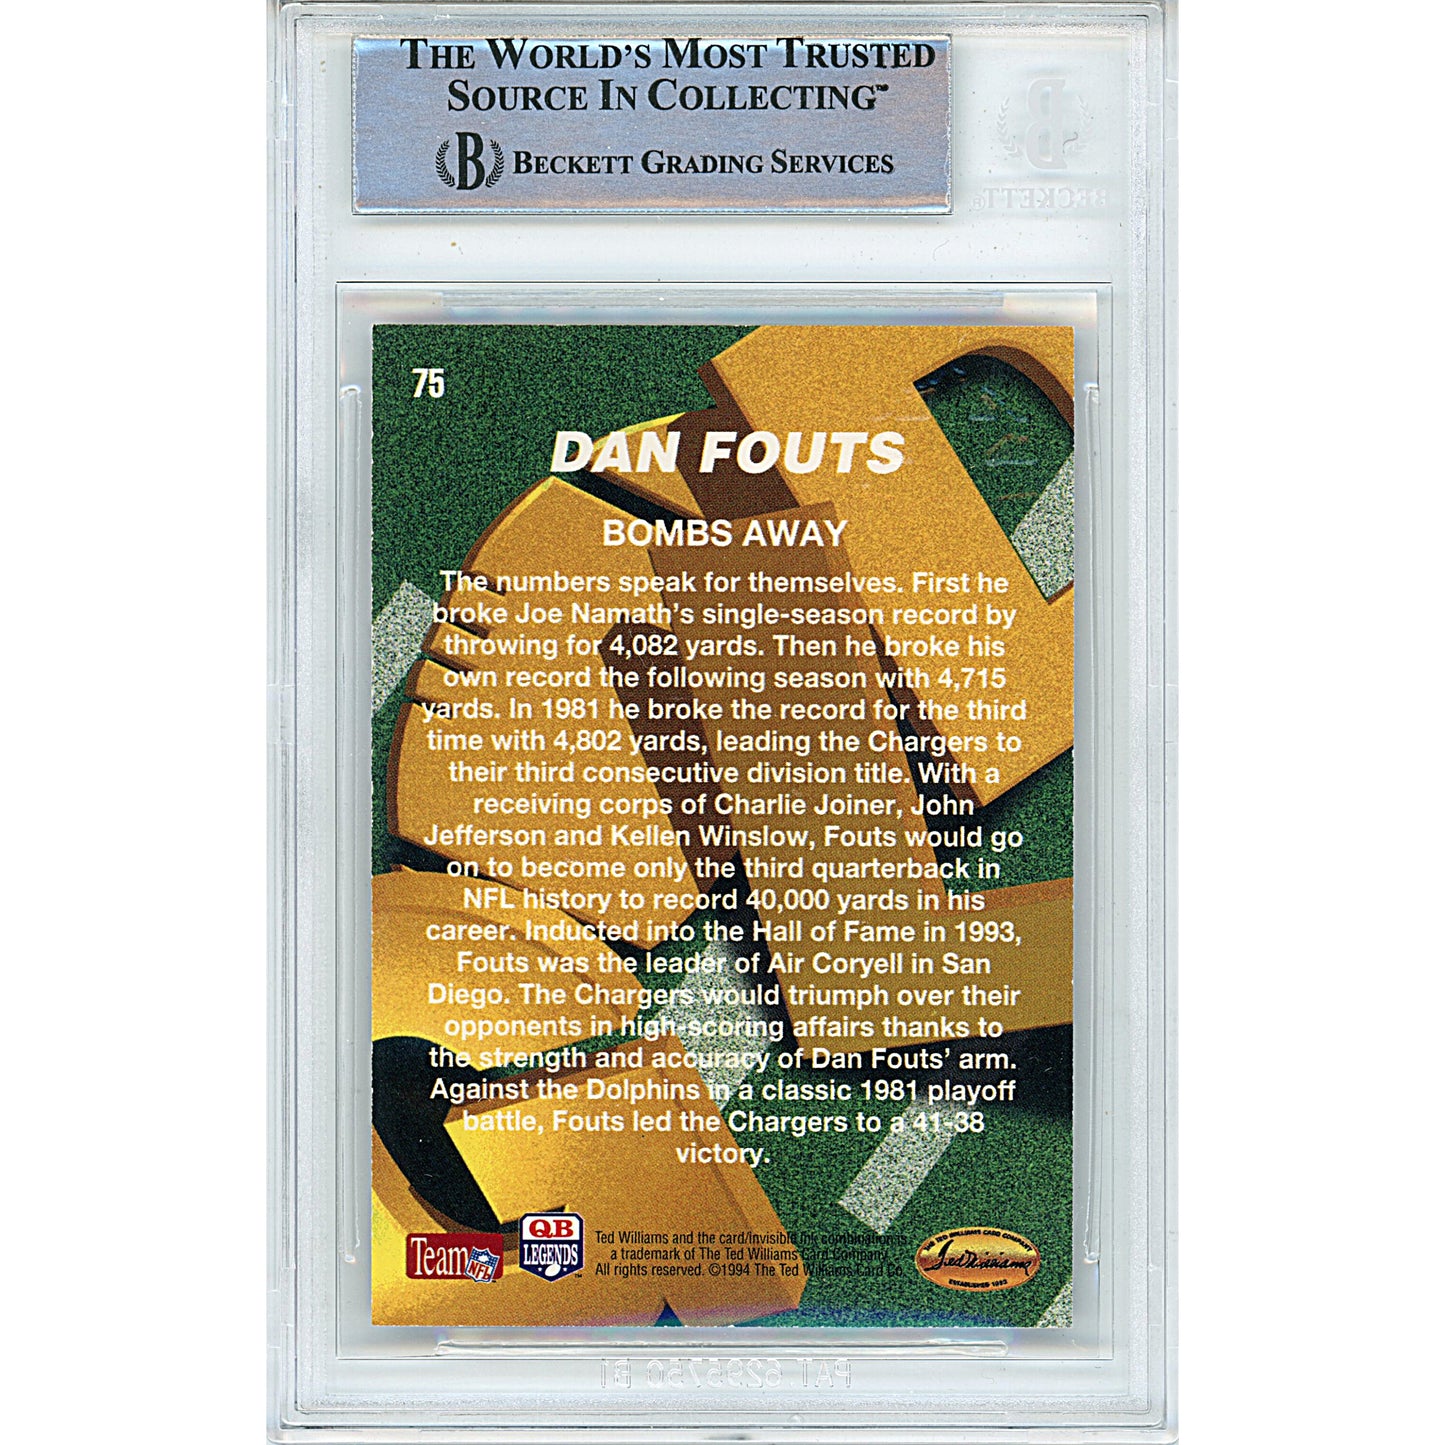 Football- Autographed- Dan Fouts Signed San Diego Chargers 1994 Ted Williams Card Company Football Card Beckett Certified Slabbed 00014998162 - 102